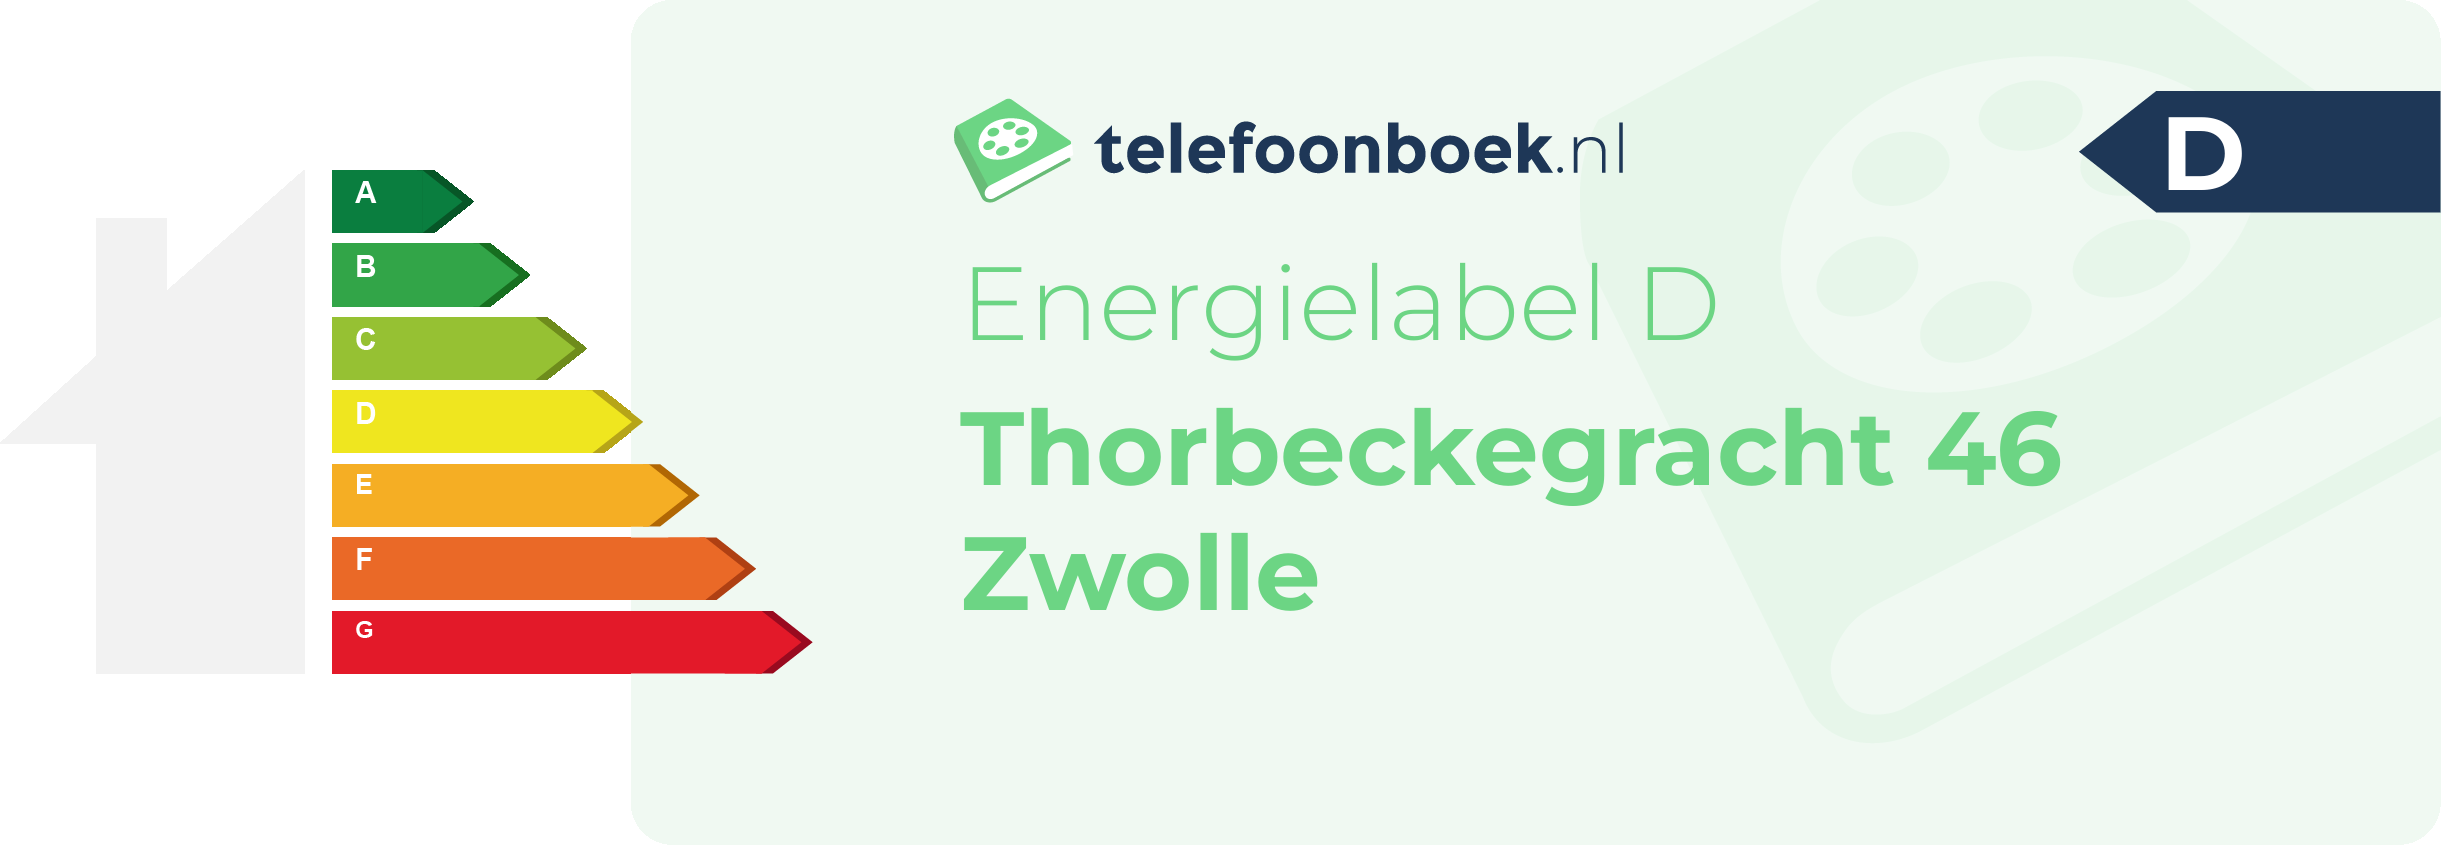 Energielabel Thorbeckegracht 46 Zwolle